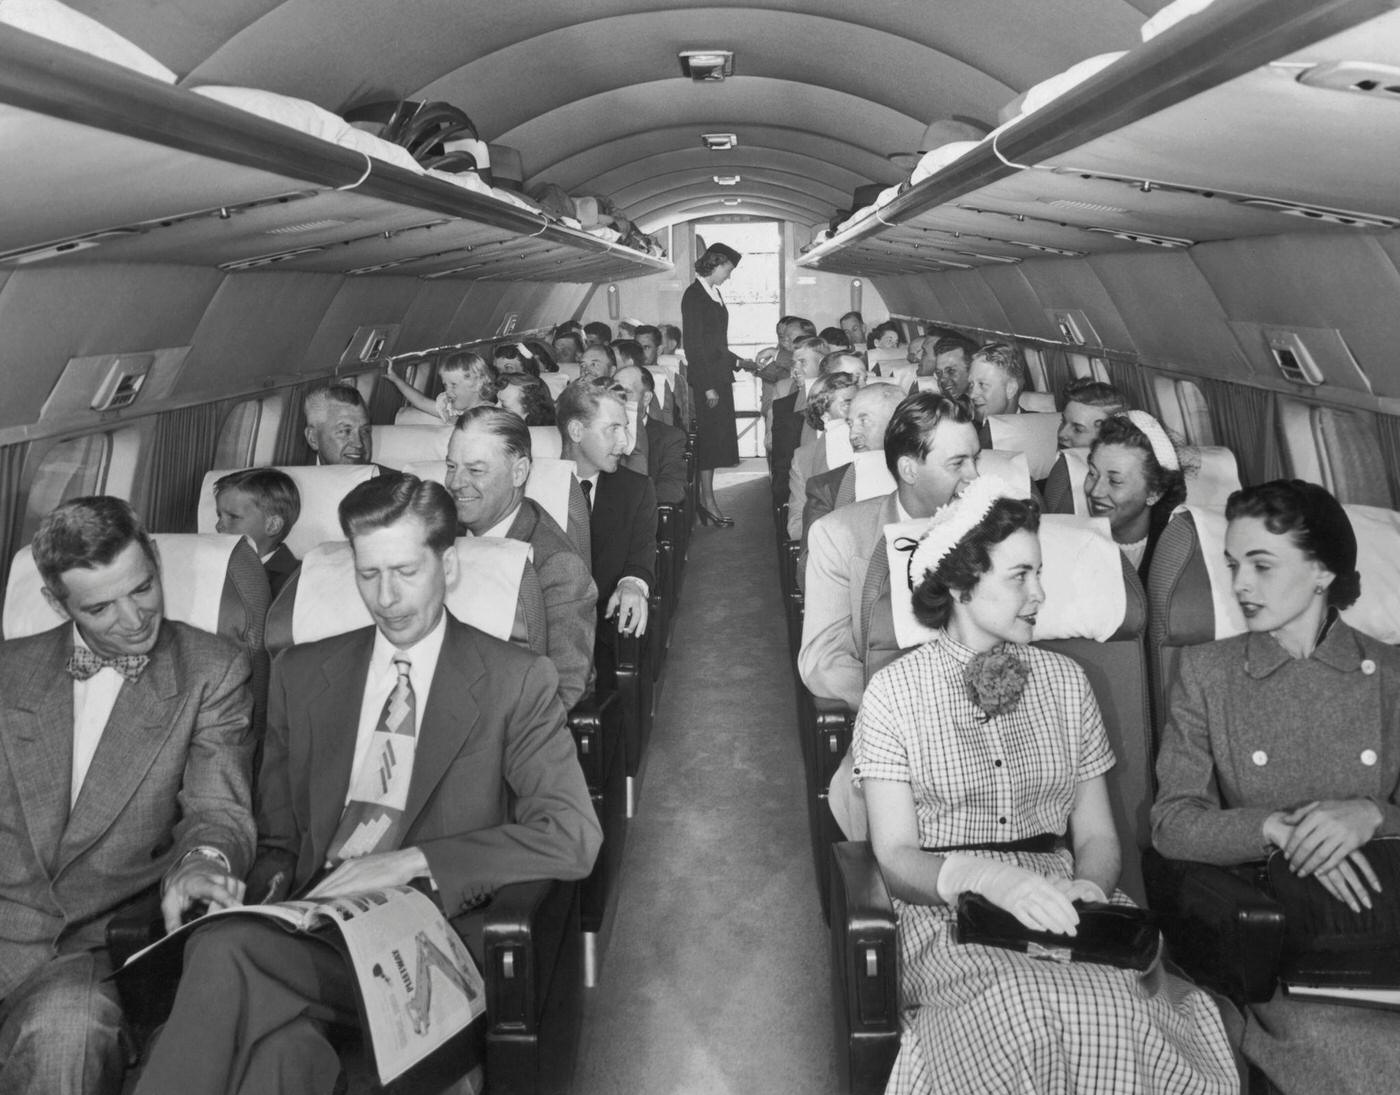 Passengers are shown seated two to a row, talking with their inflight neighbors aboard a Mainliner Convair aircraft, while the flight attendant works at the back of the plane in the late 1940s.